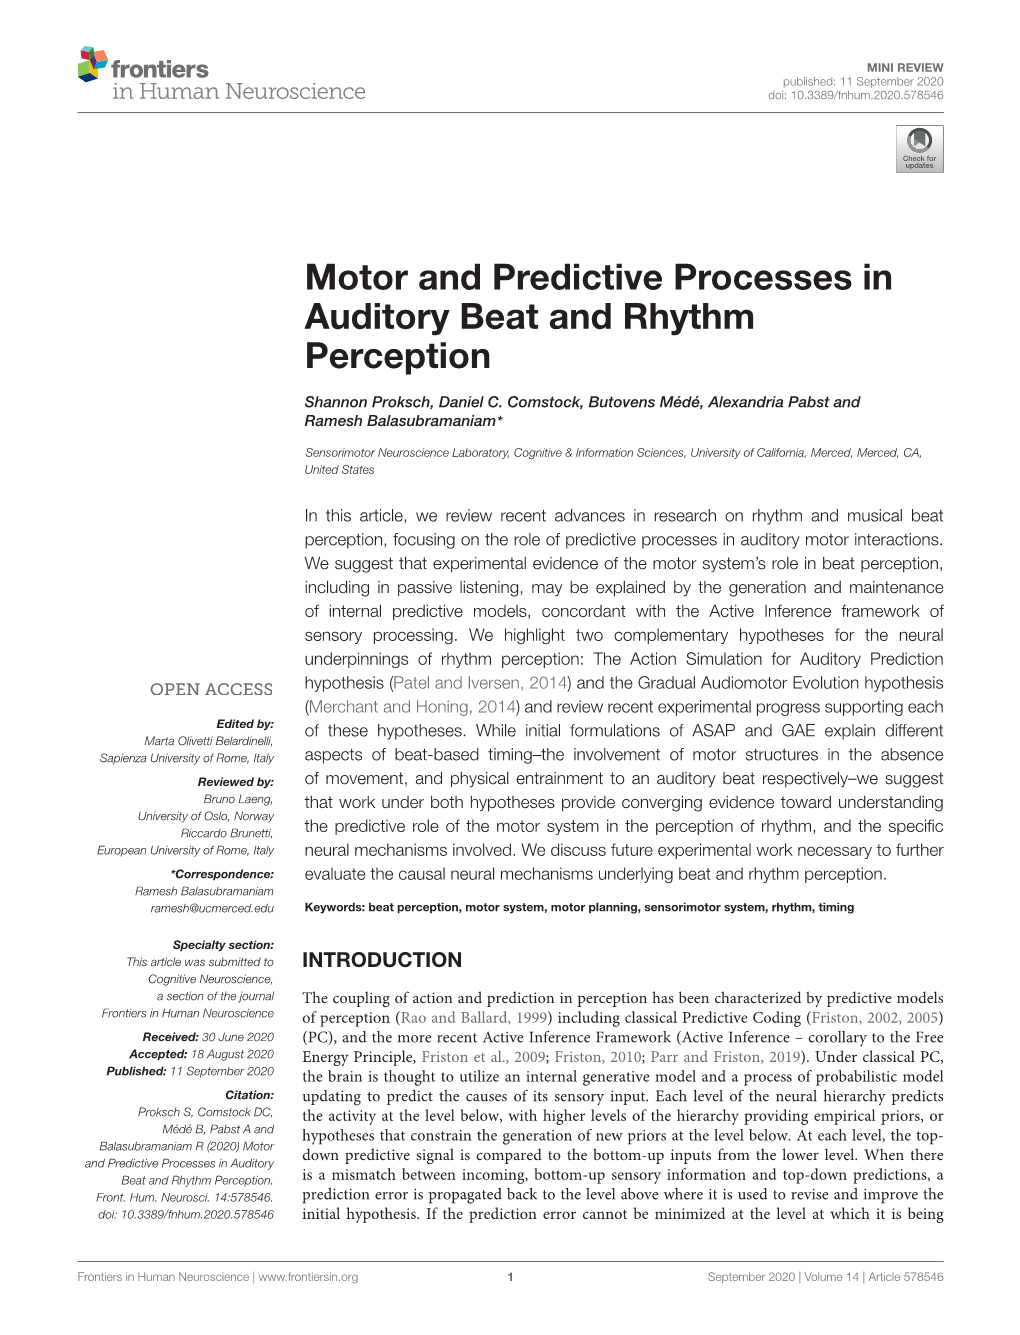 Motor and Predictive Processes in Auditory Beat and Rhythm Perception